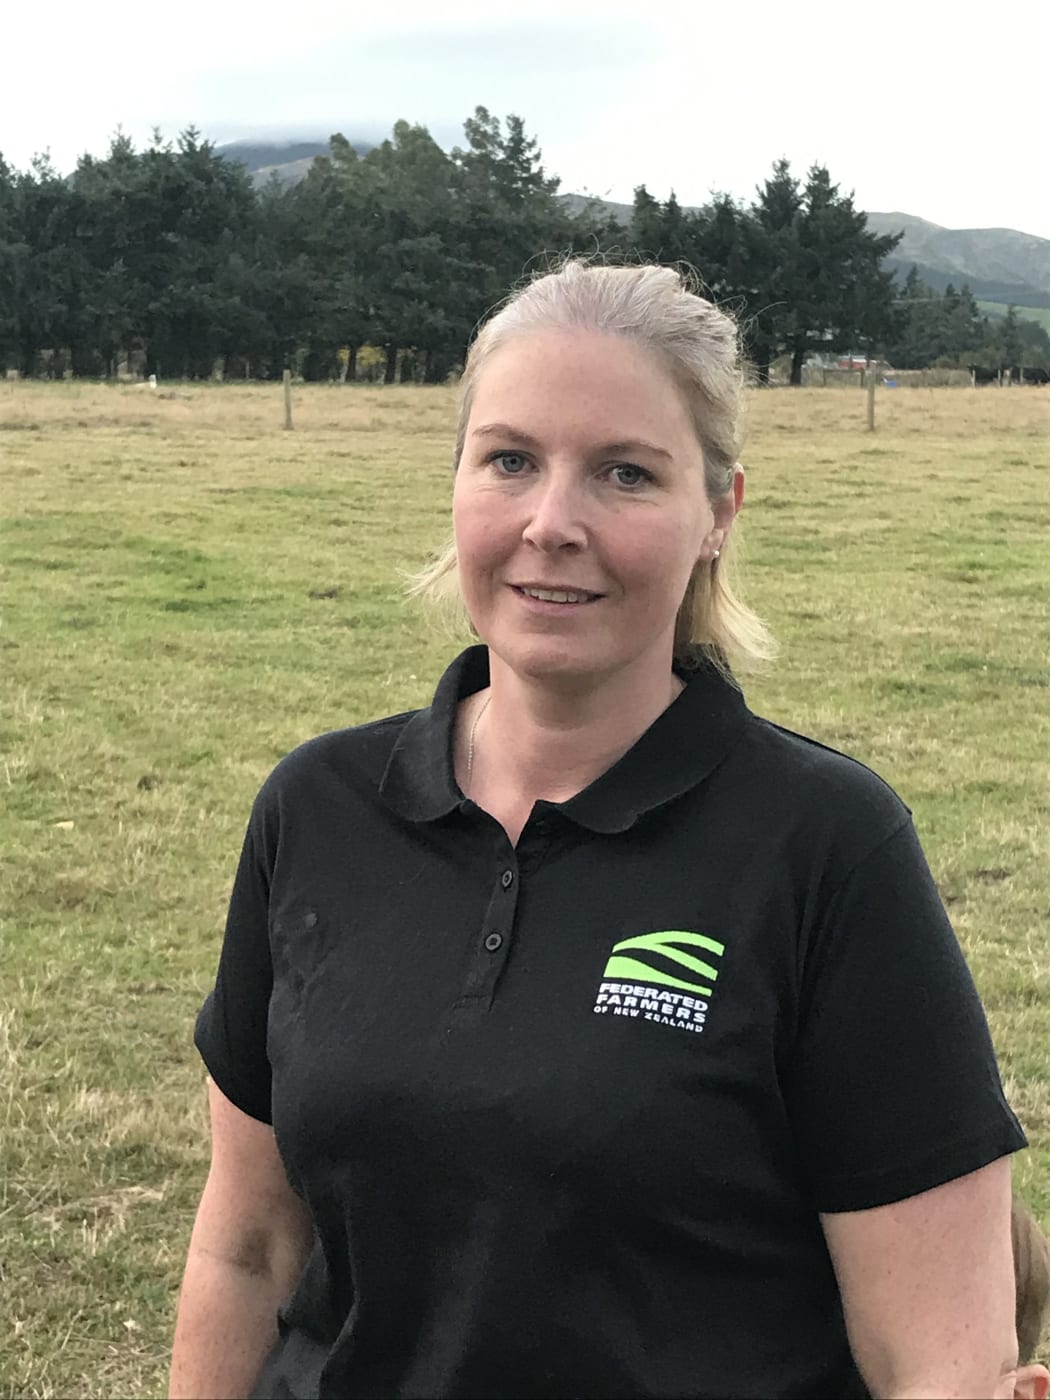 Federated Farmers' North Canterbury provincial president Caroline Amyes said the border reopening will be a relief for the sector.